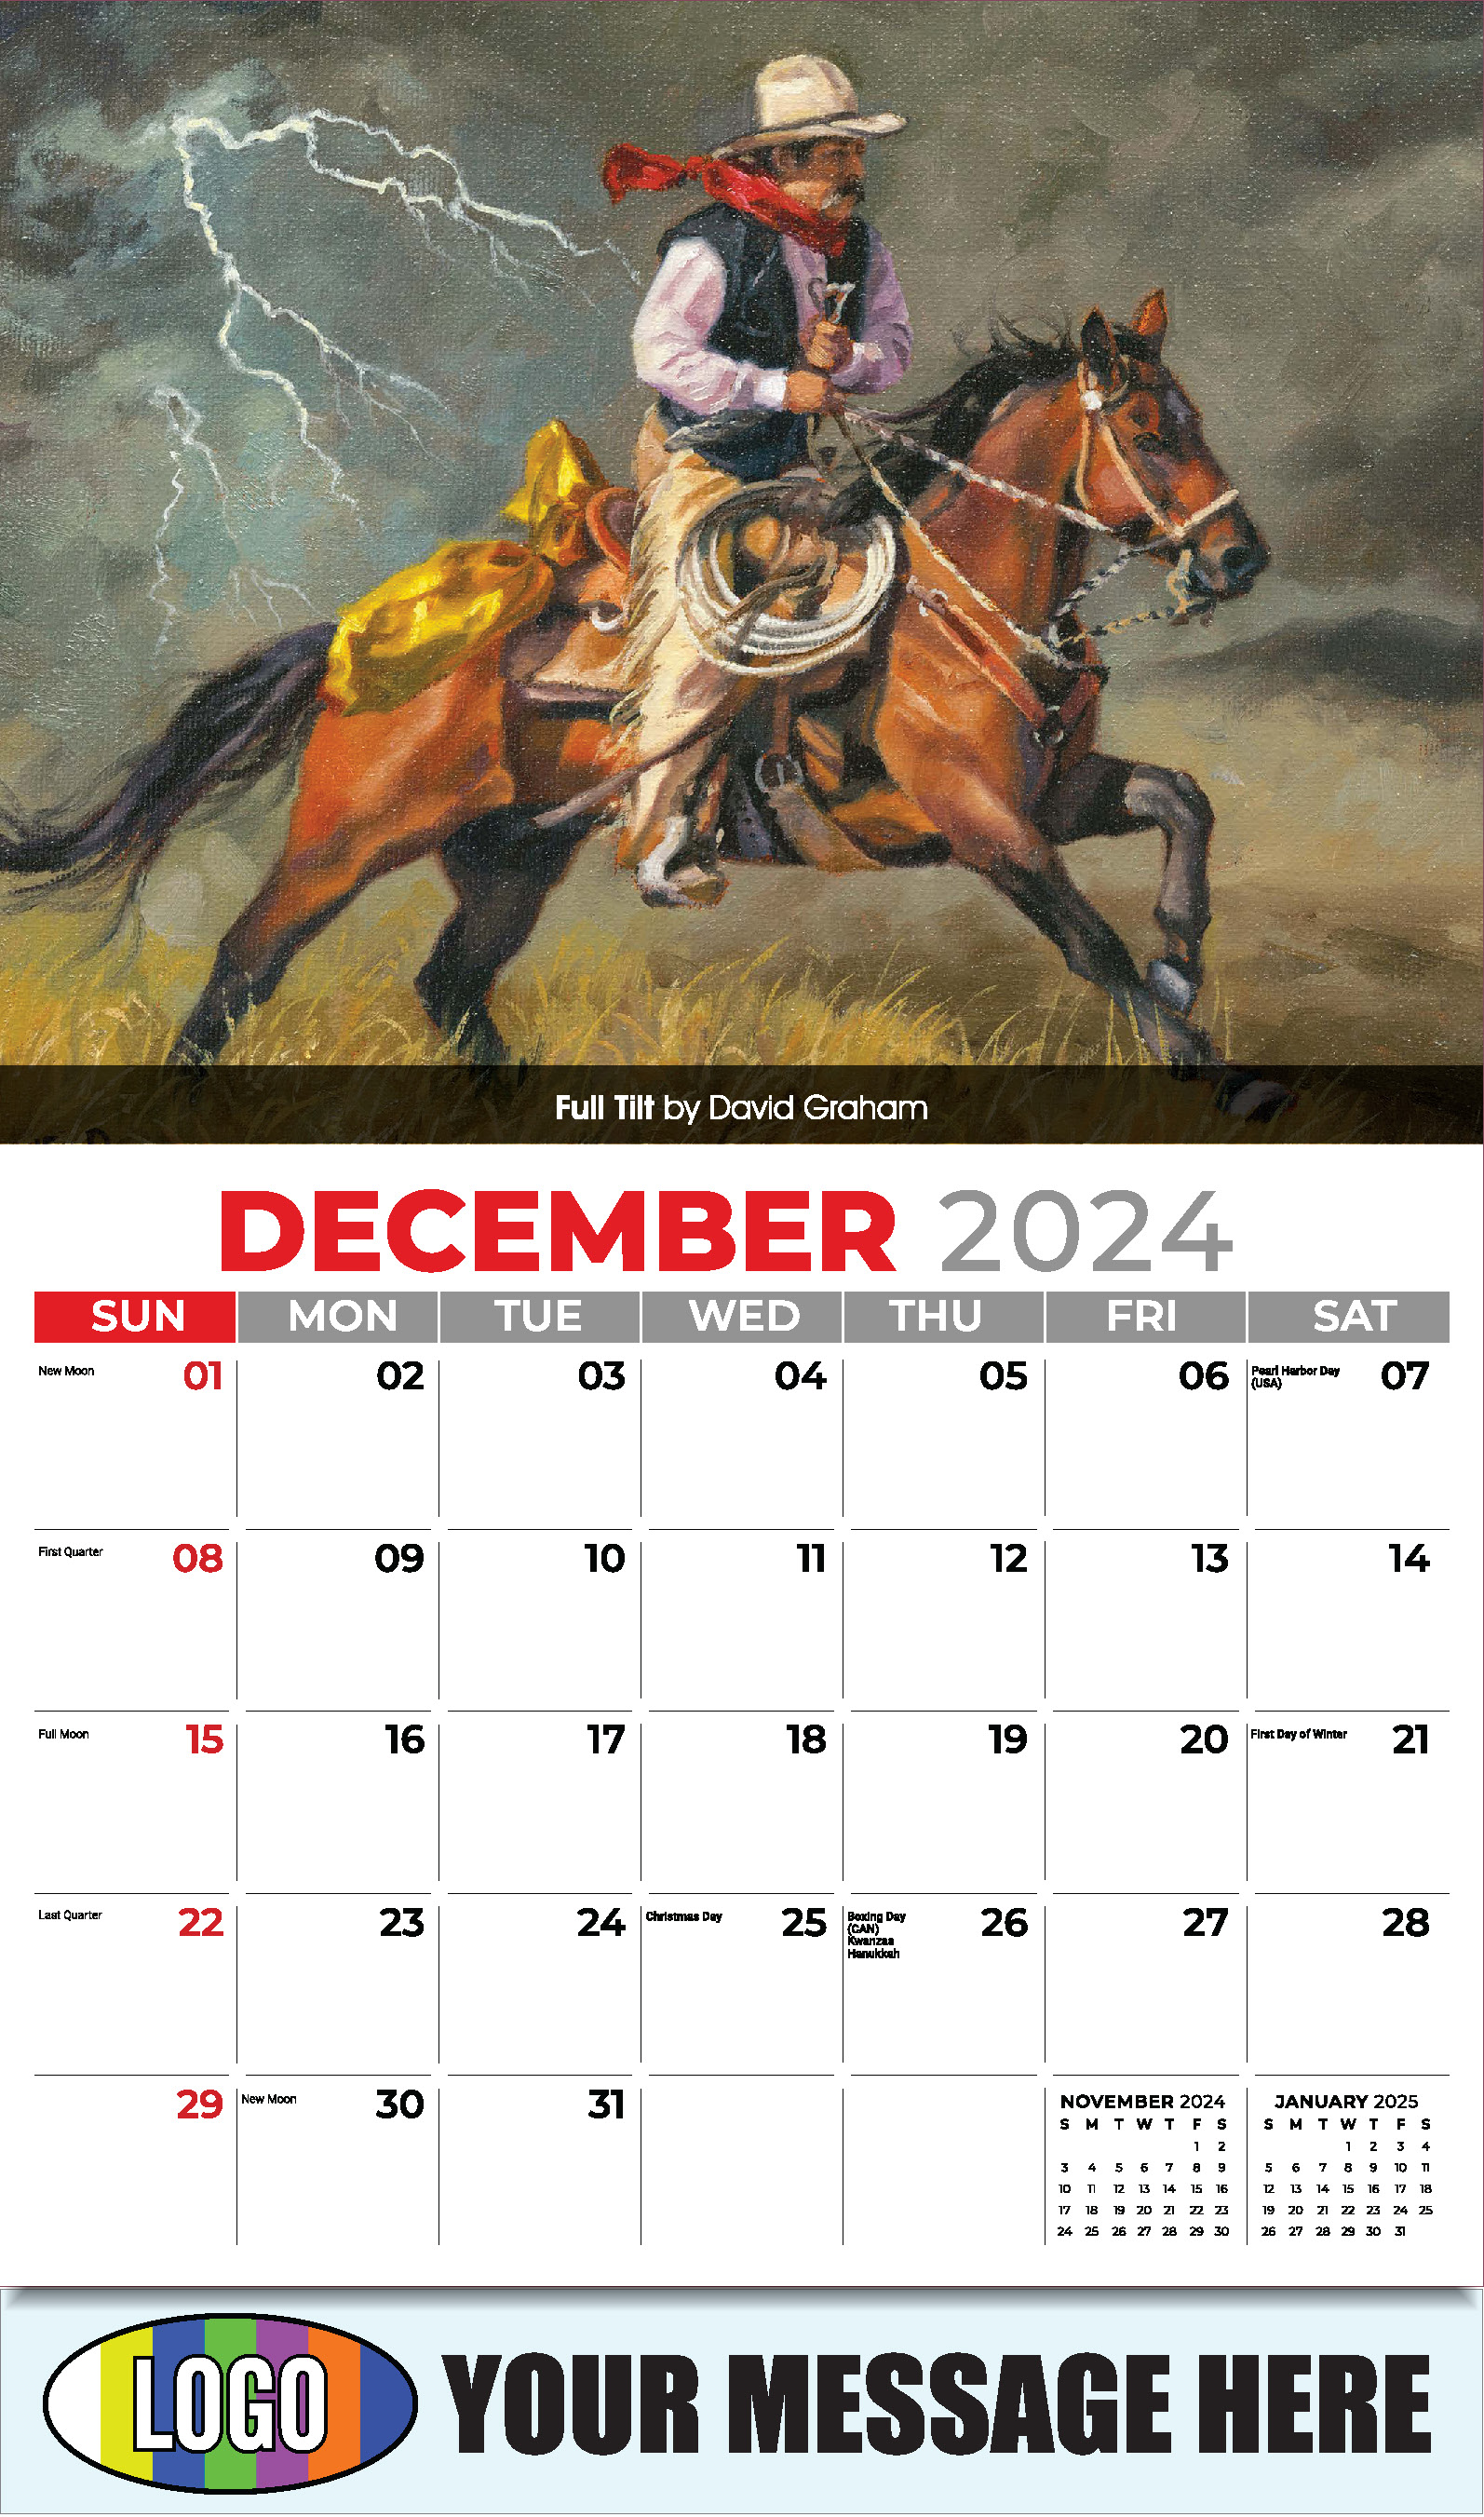 Spirit of the Old West 2025 Old West Art Business Promo Wall Calendar - December_a